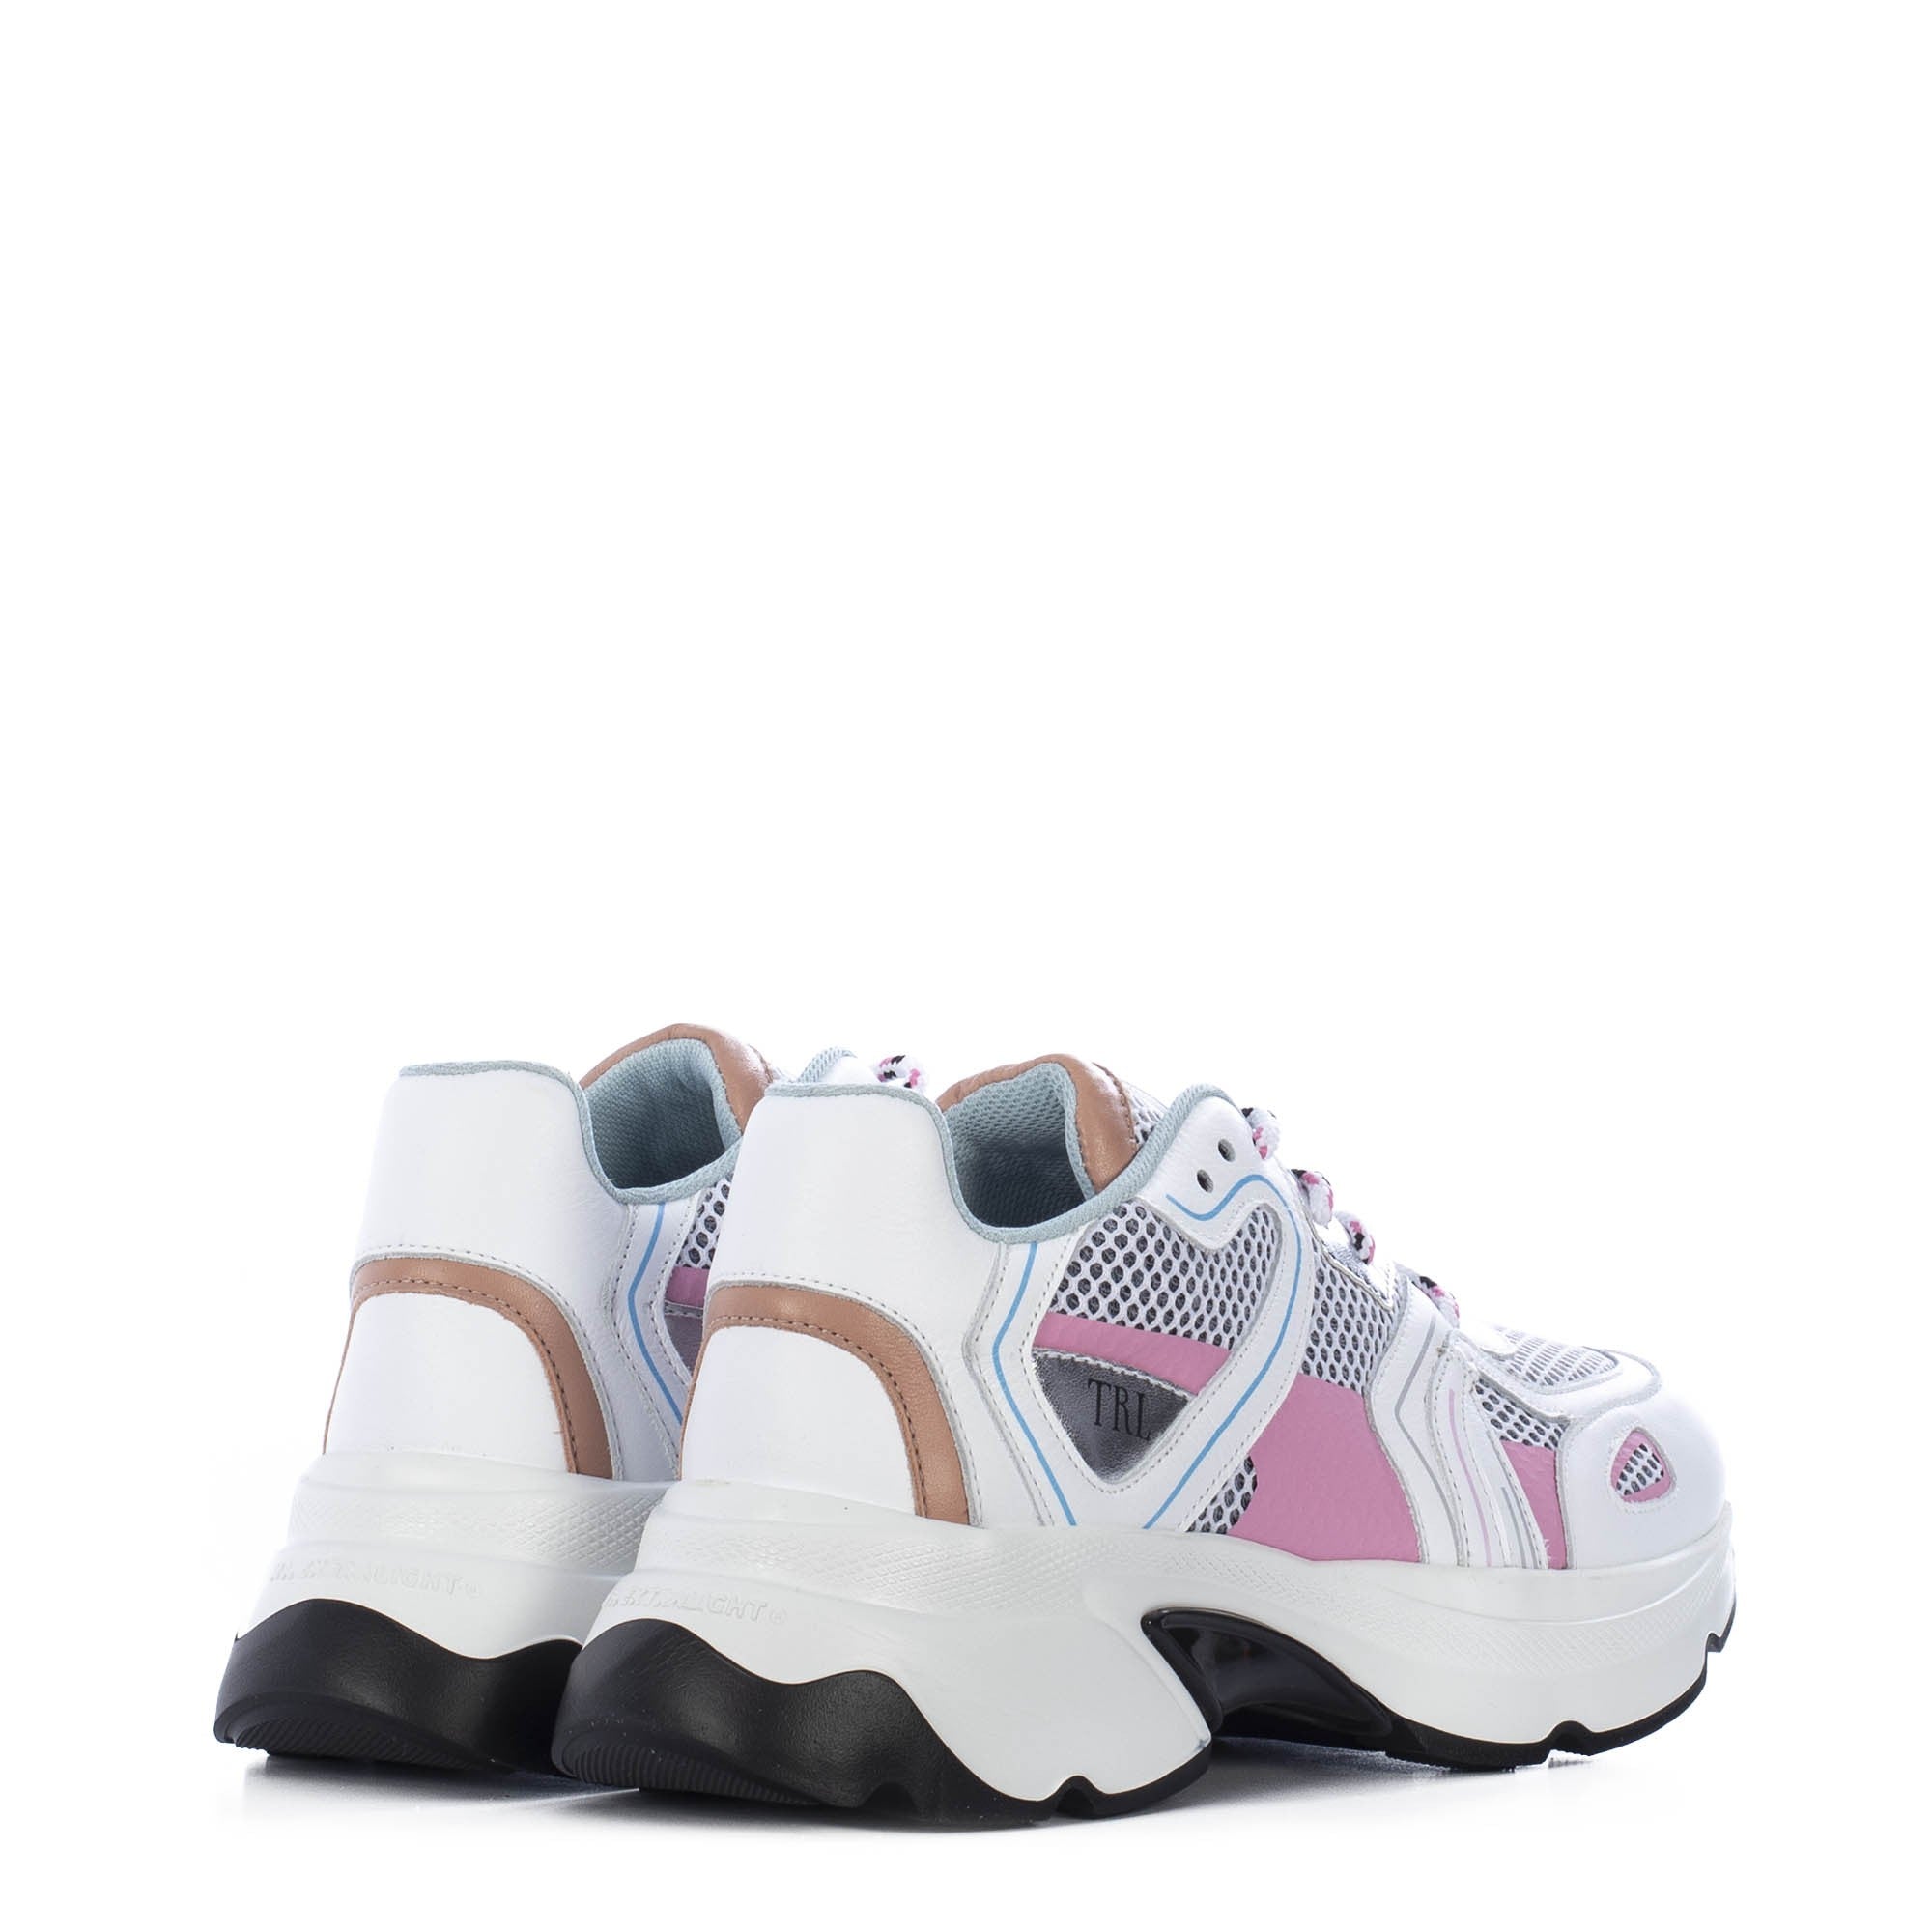 TORAL RUNNER 9 WHITE AND PINK SNEAKERS (6942835966092)